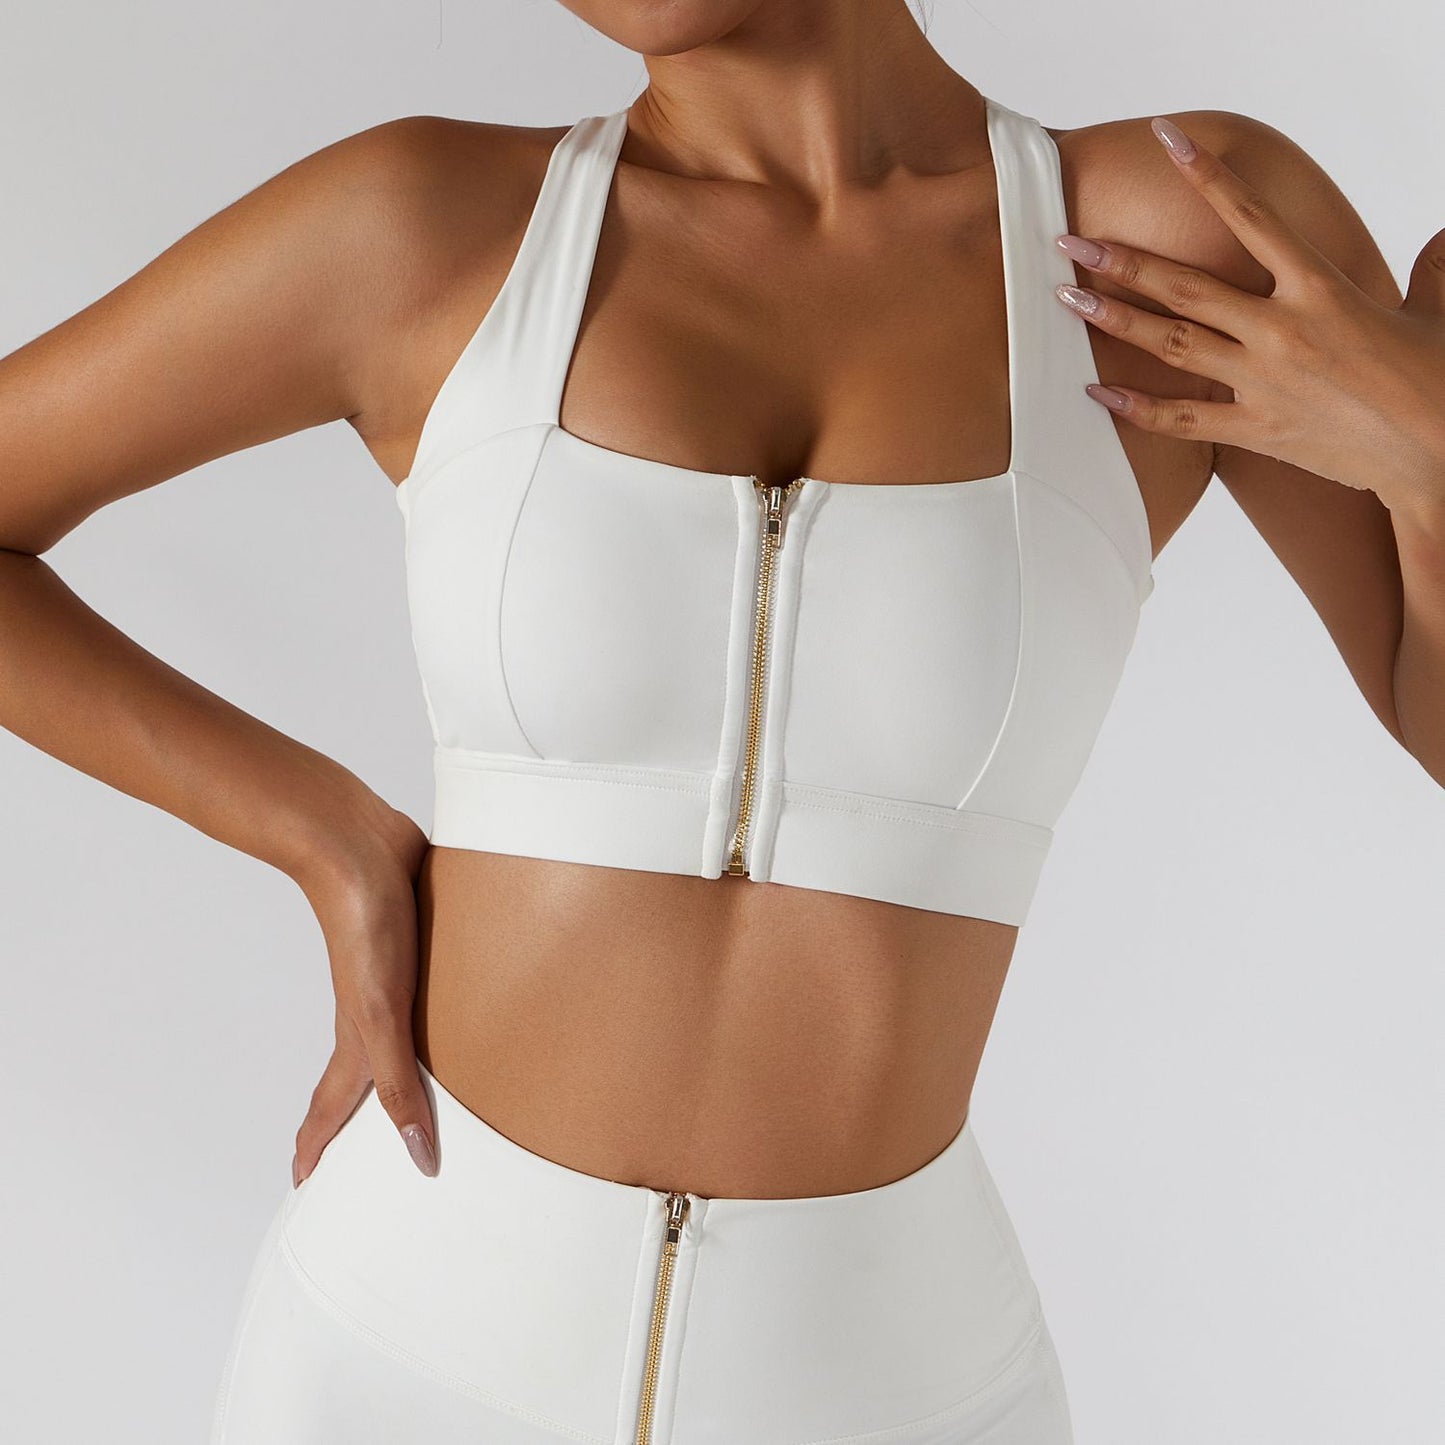 Amazing White Fitness Top For women